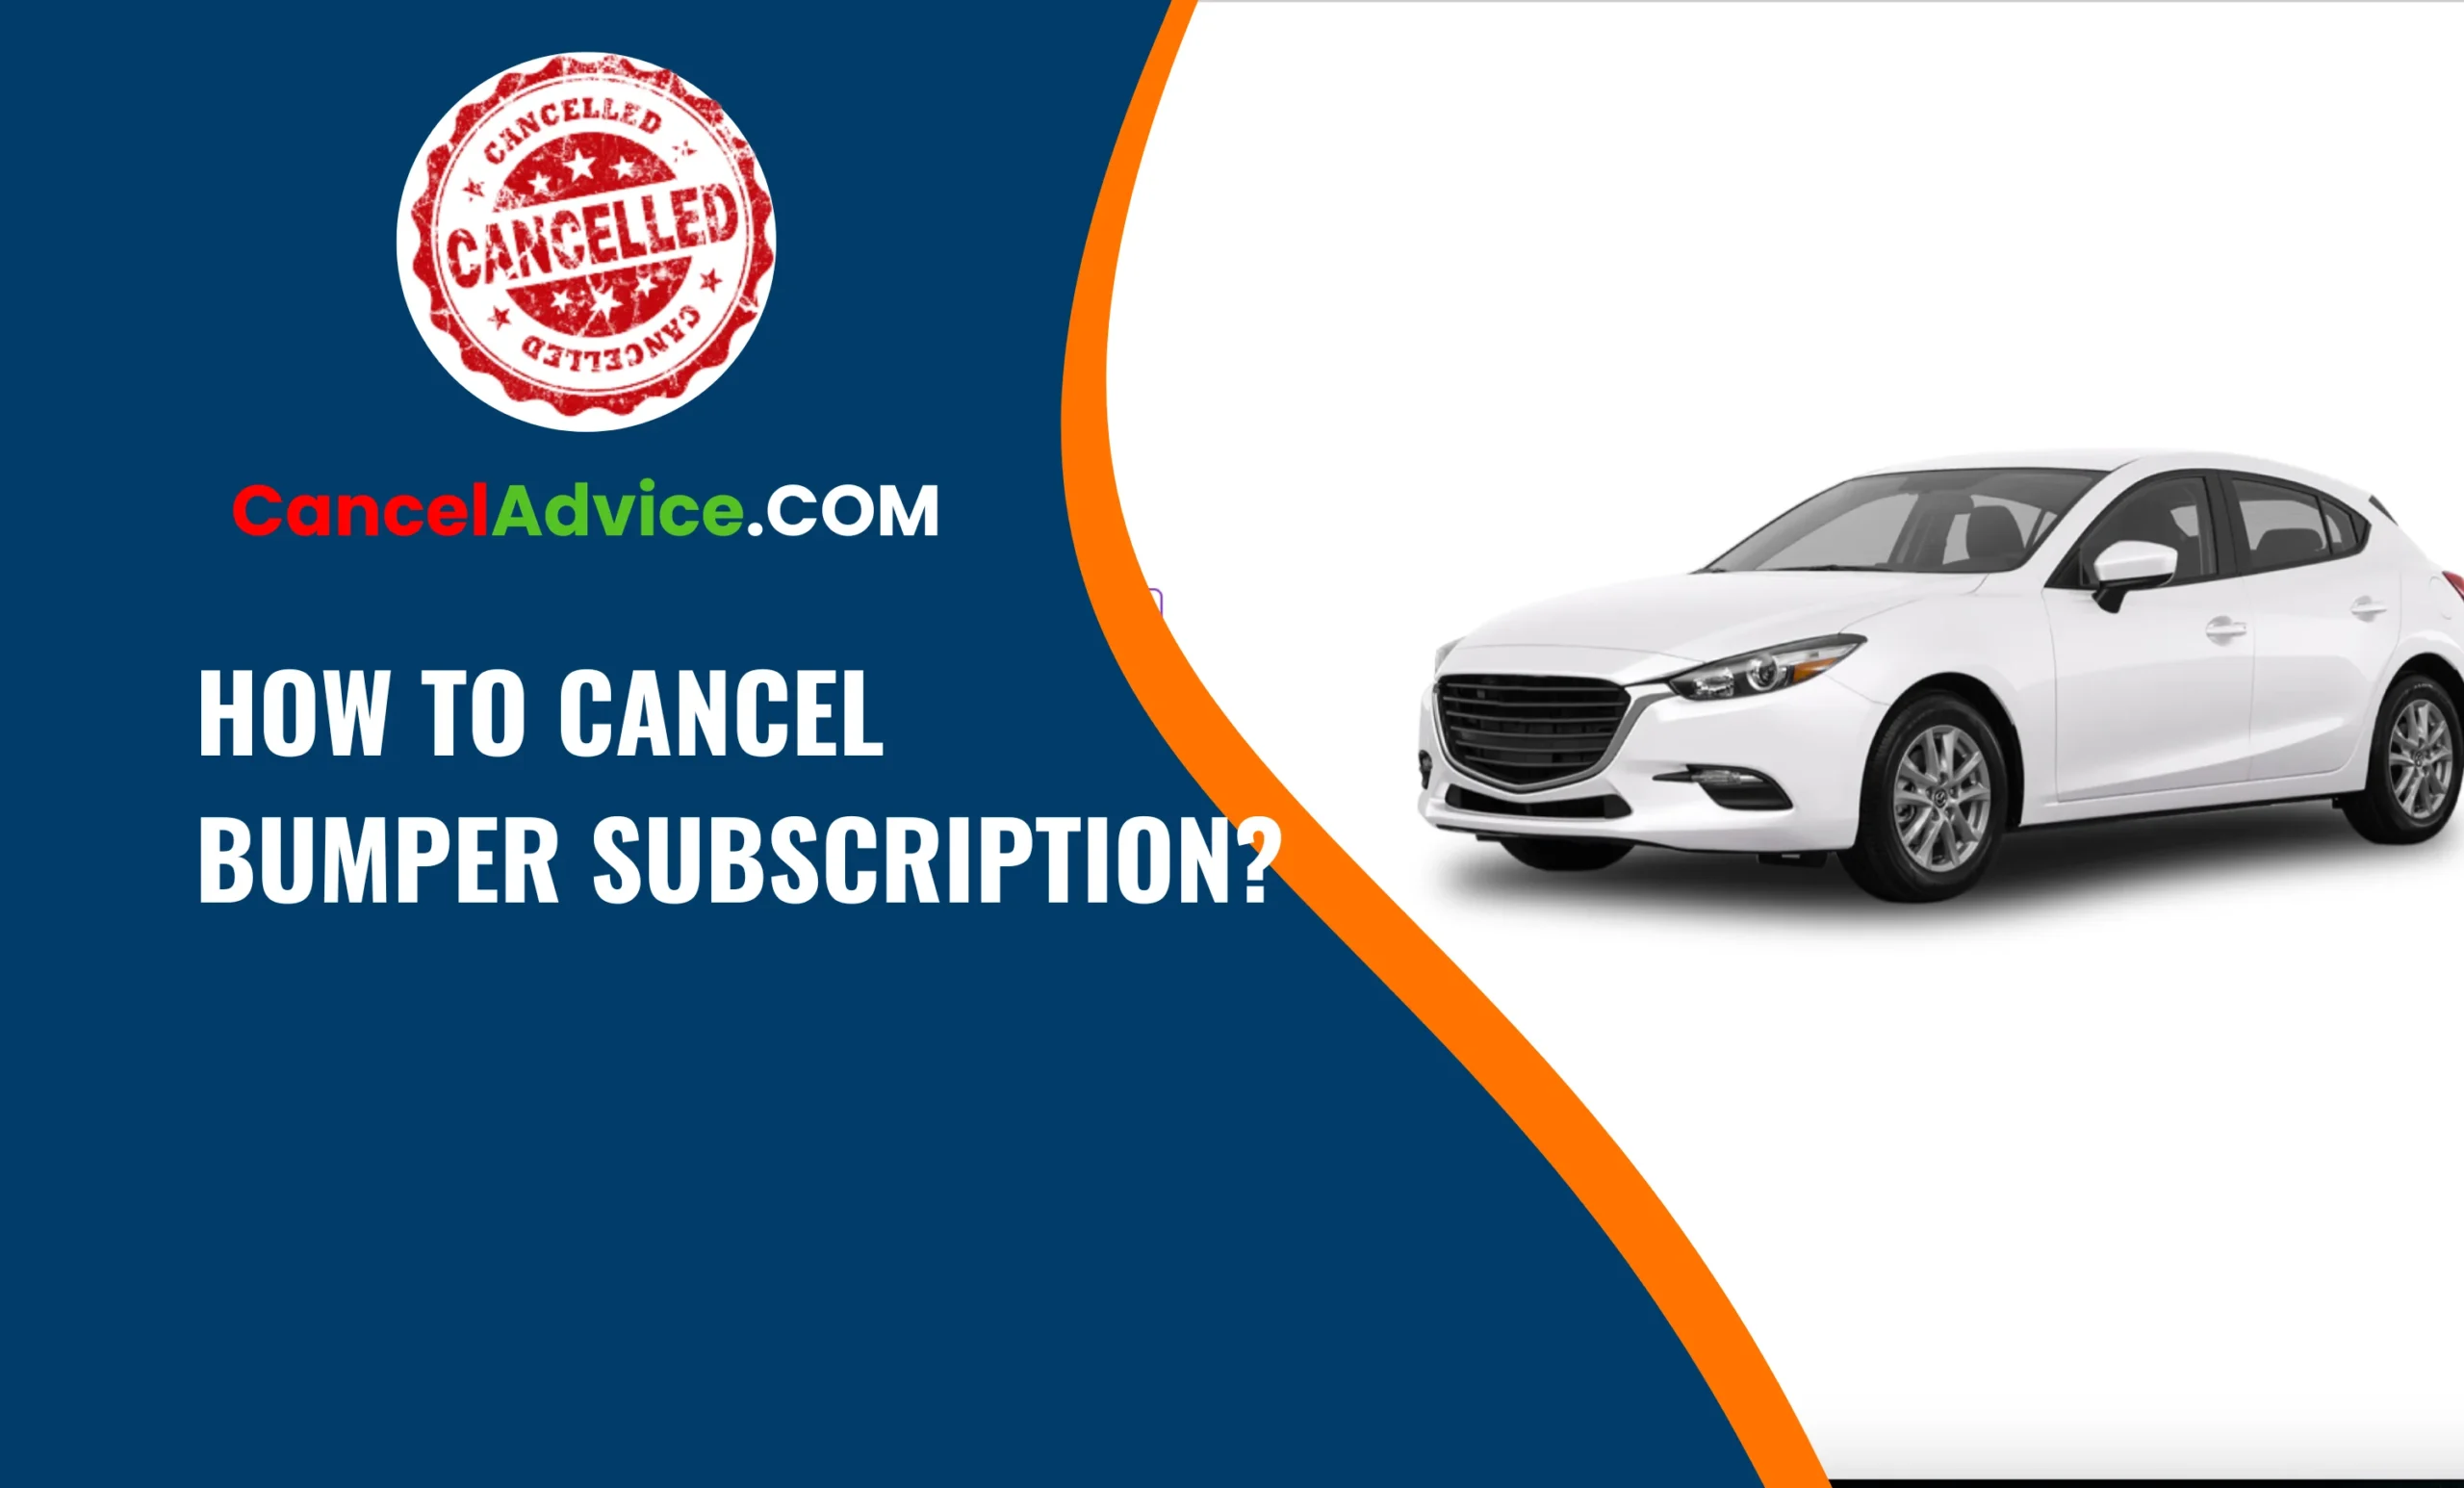 How to Cancel a Bumper Subscription